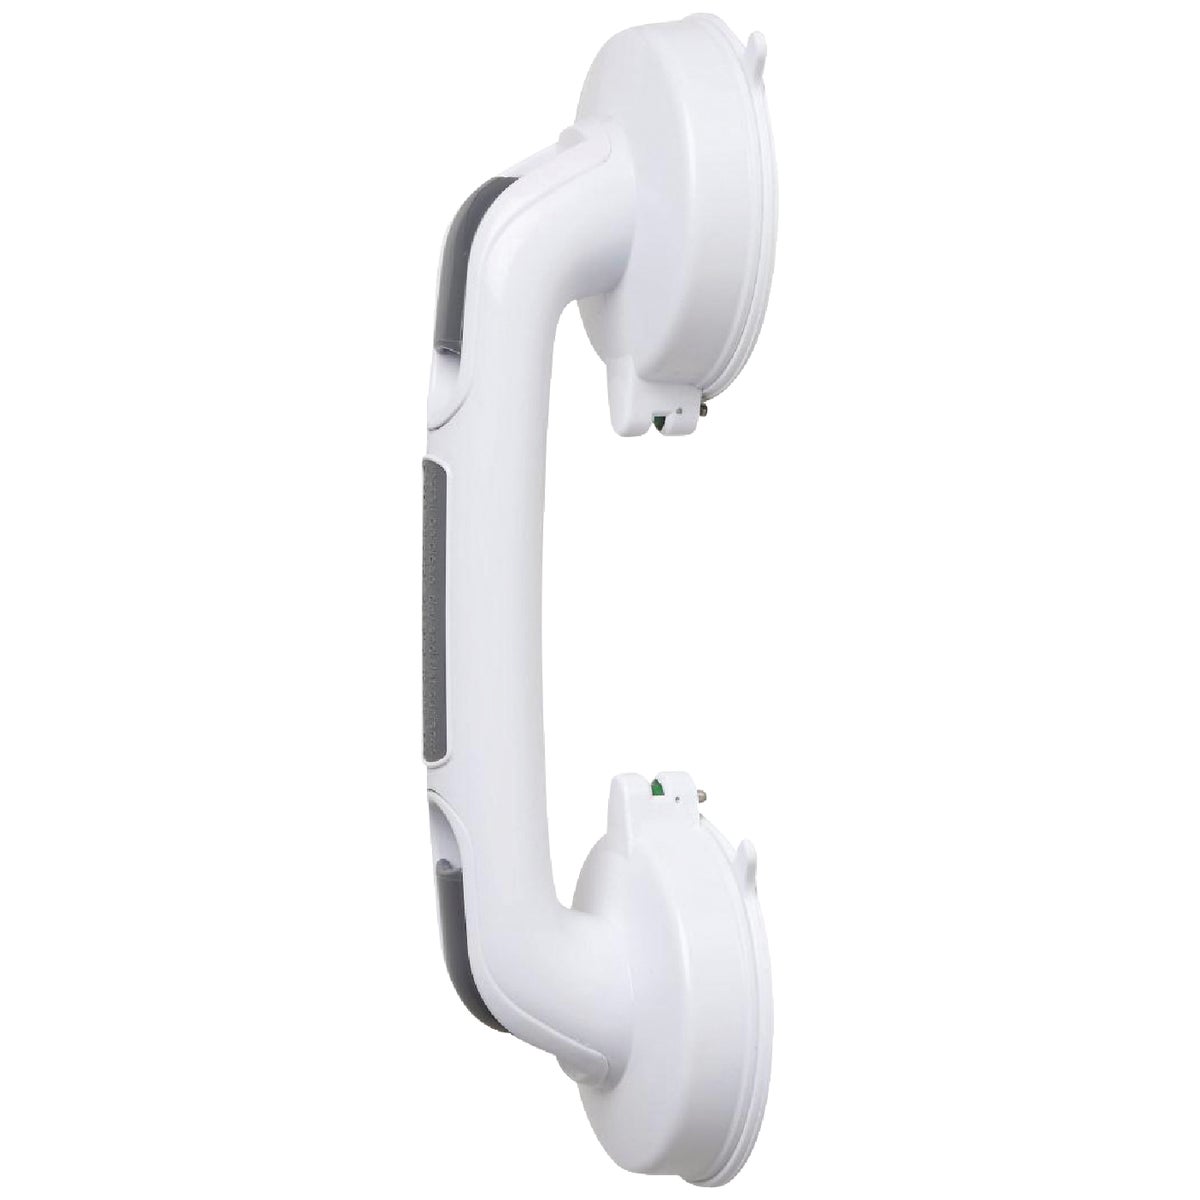 Medline Suction 12 In. Suction Cup Grab Bar, White